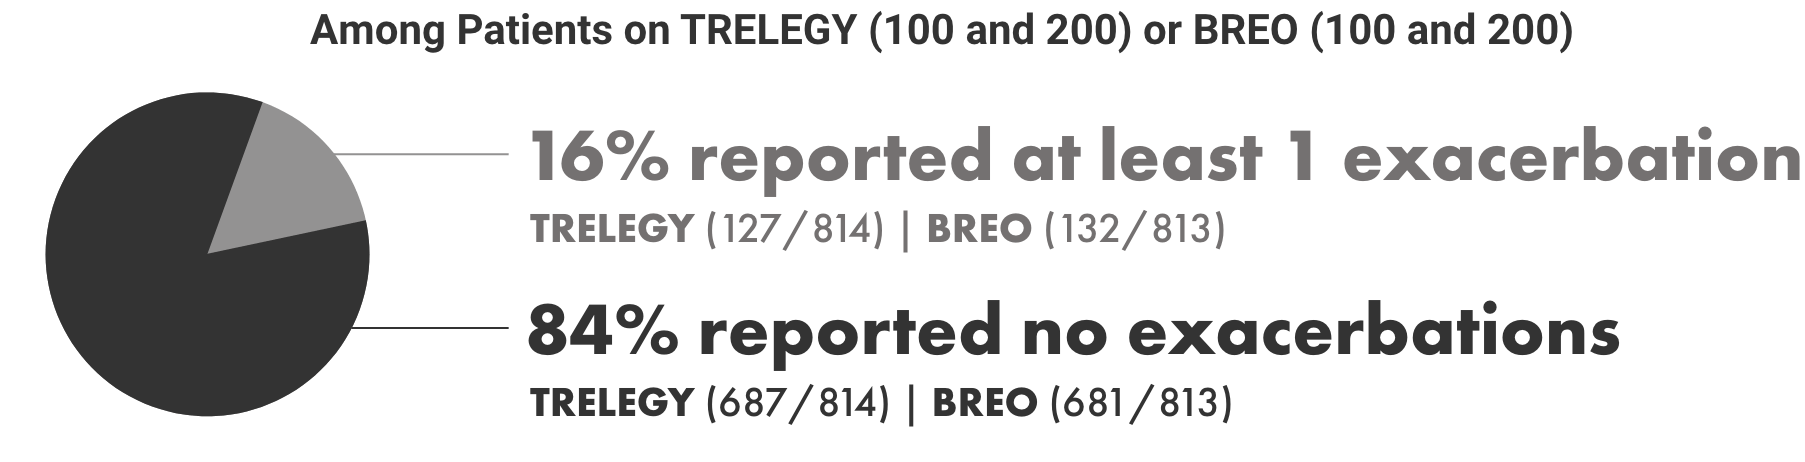 Among Patients on TRELEGY (100 and 200) or BREO (100 and 200)